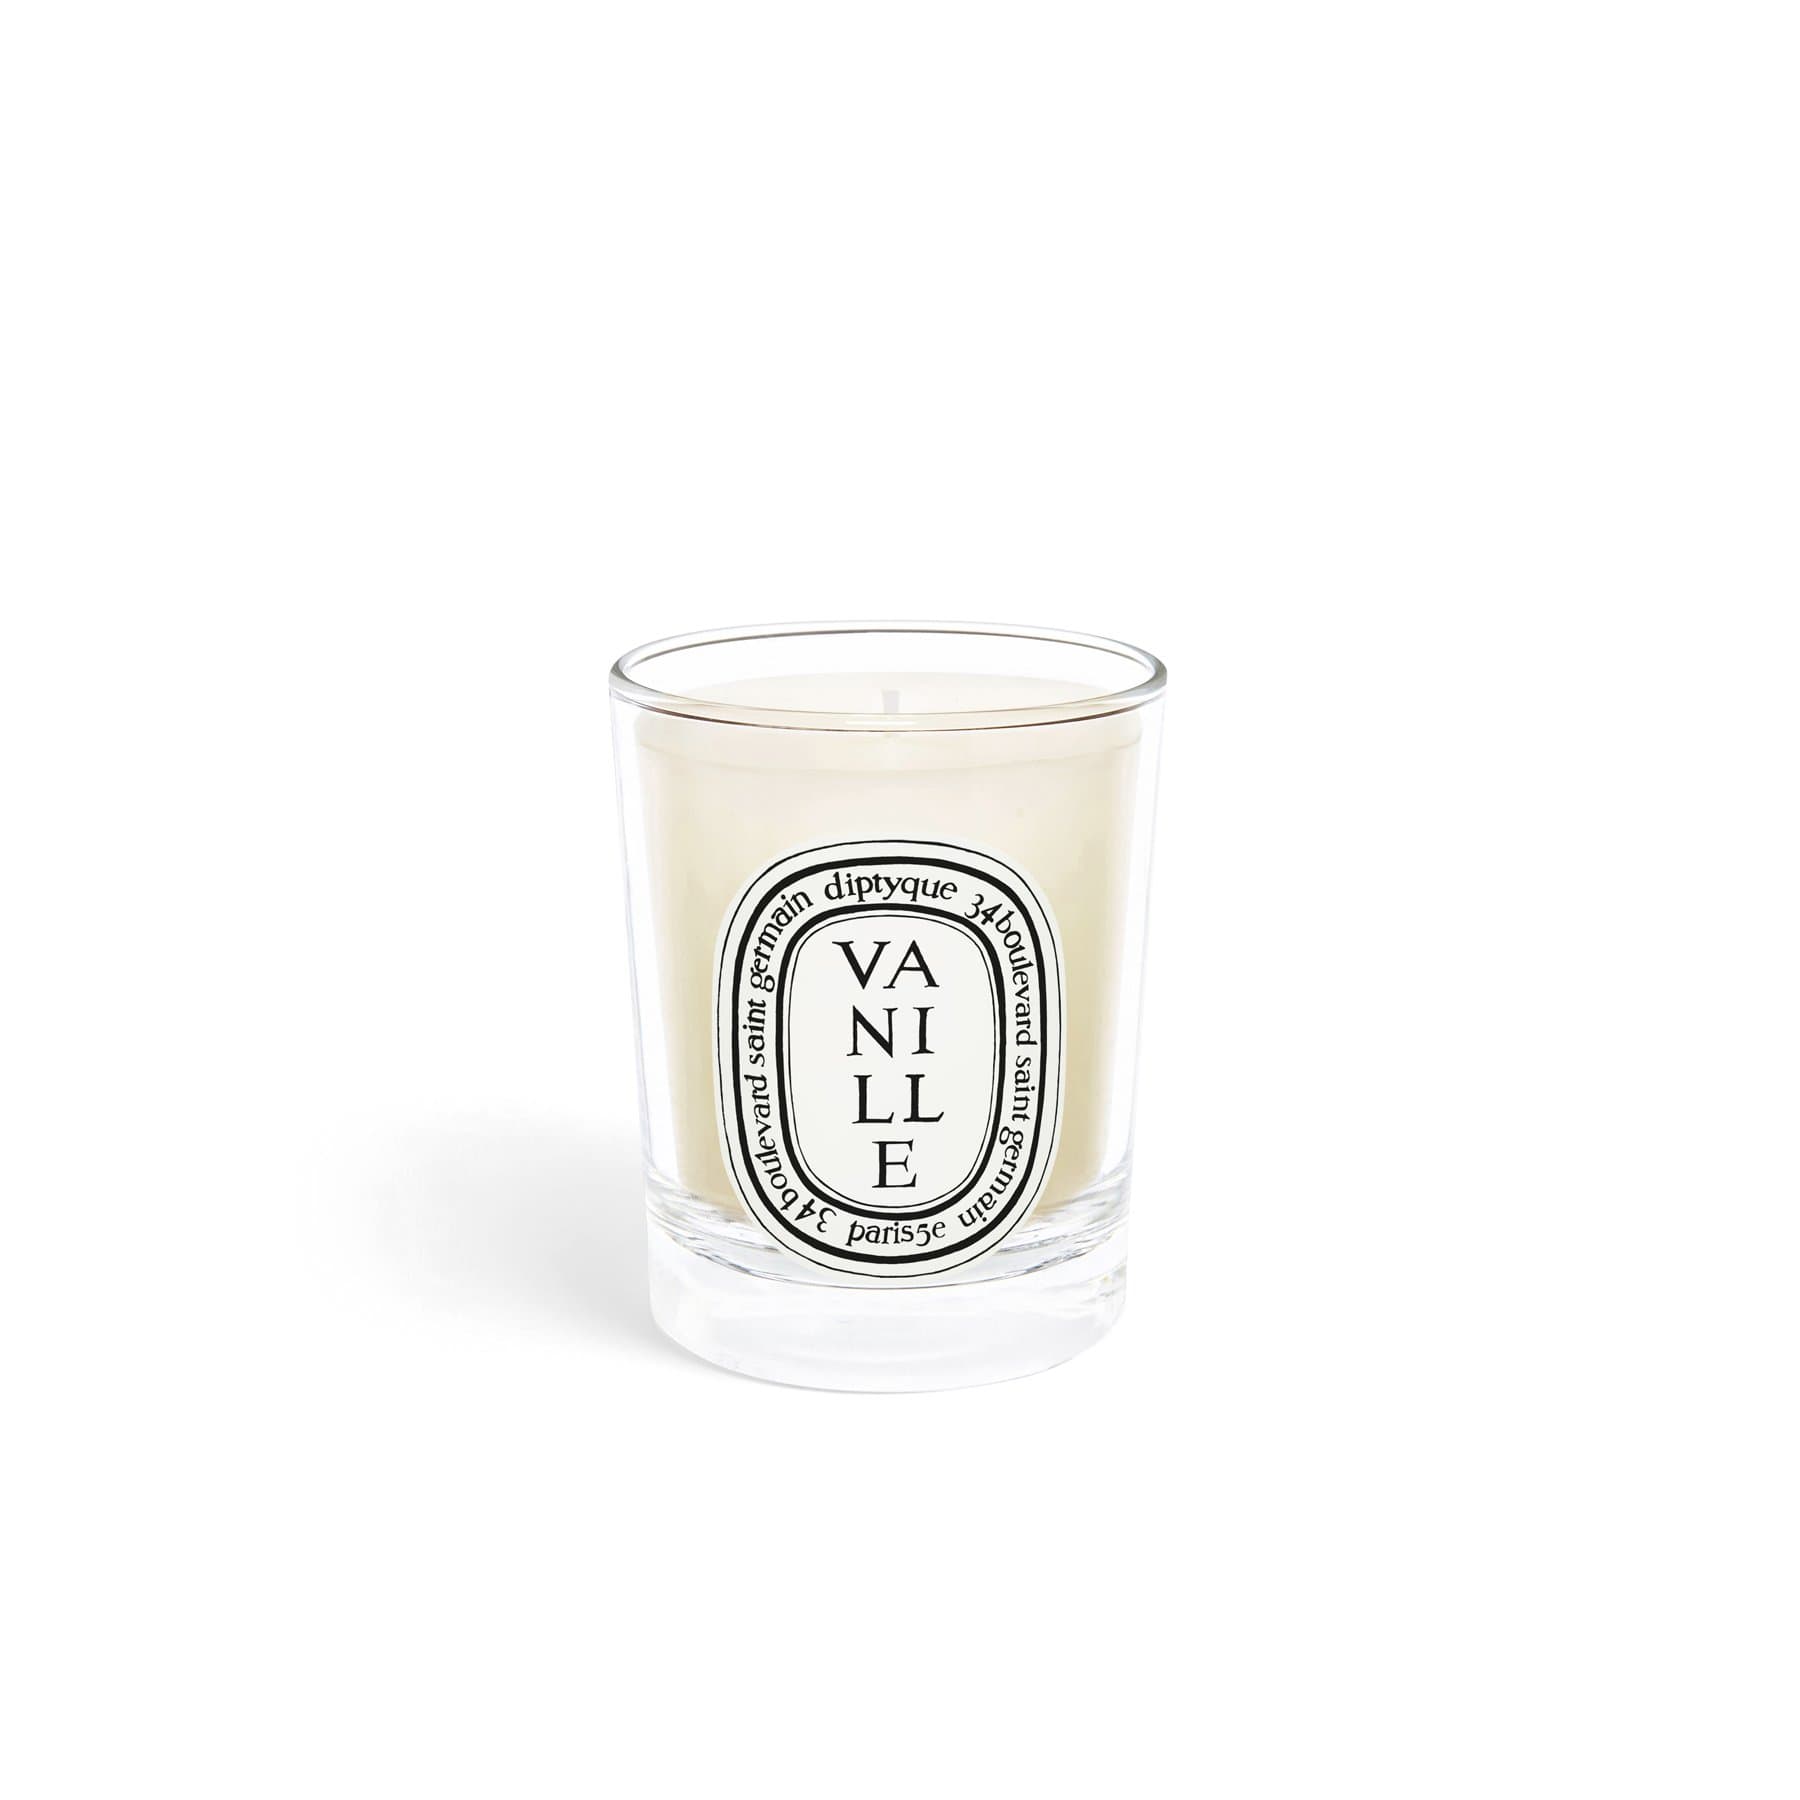 Vanille Diptyque Scented Candle